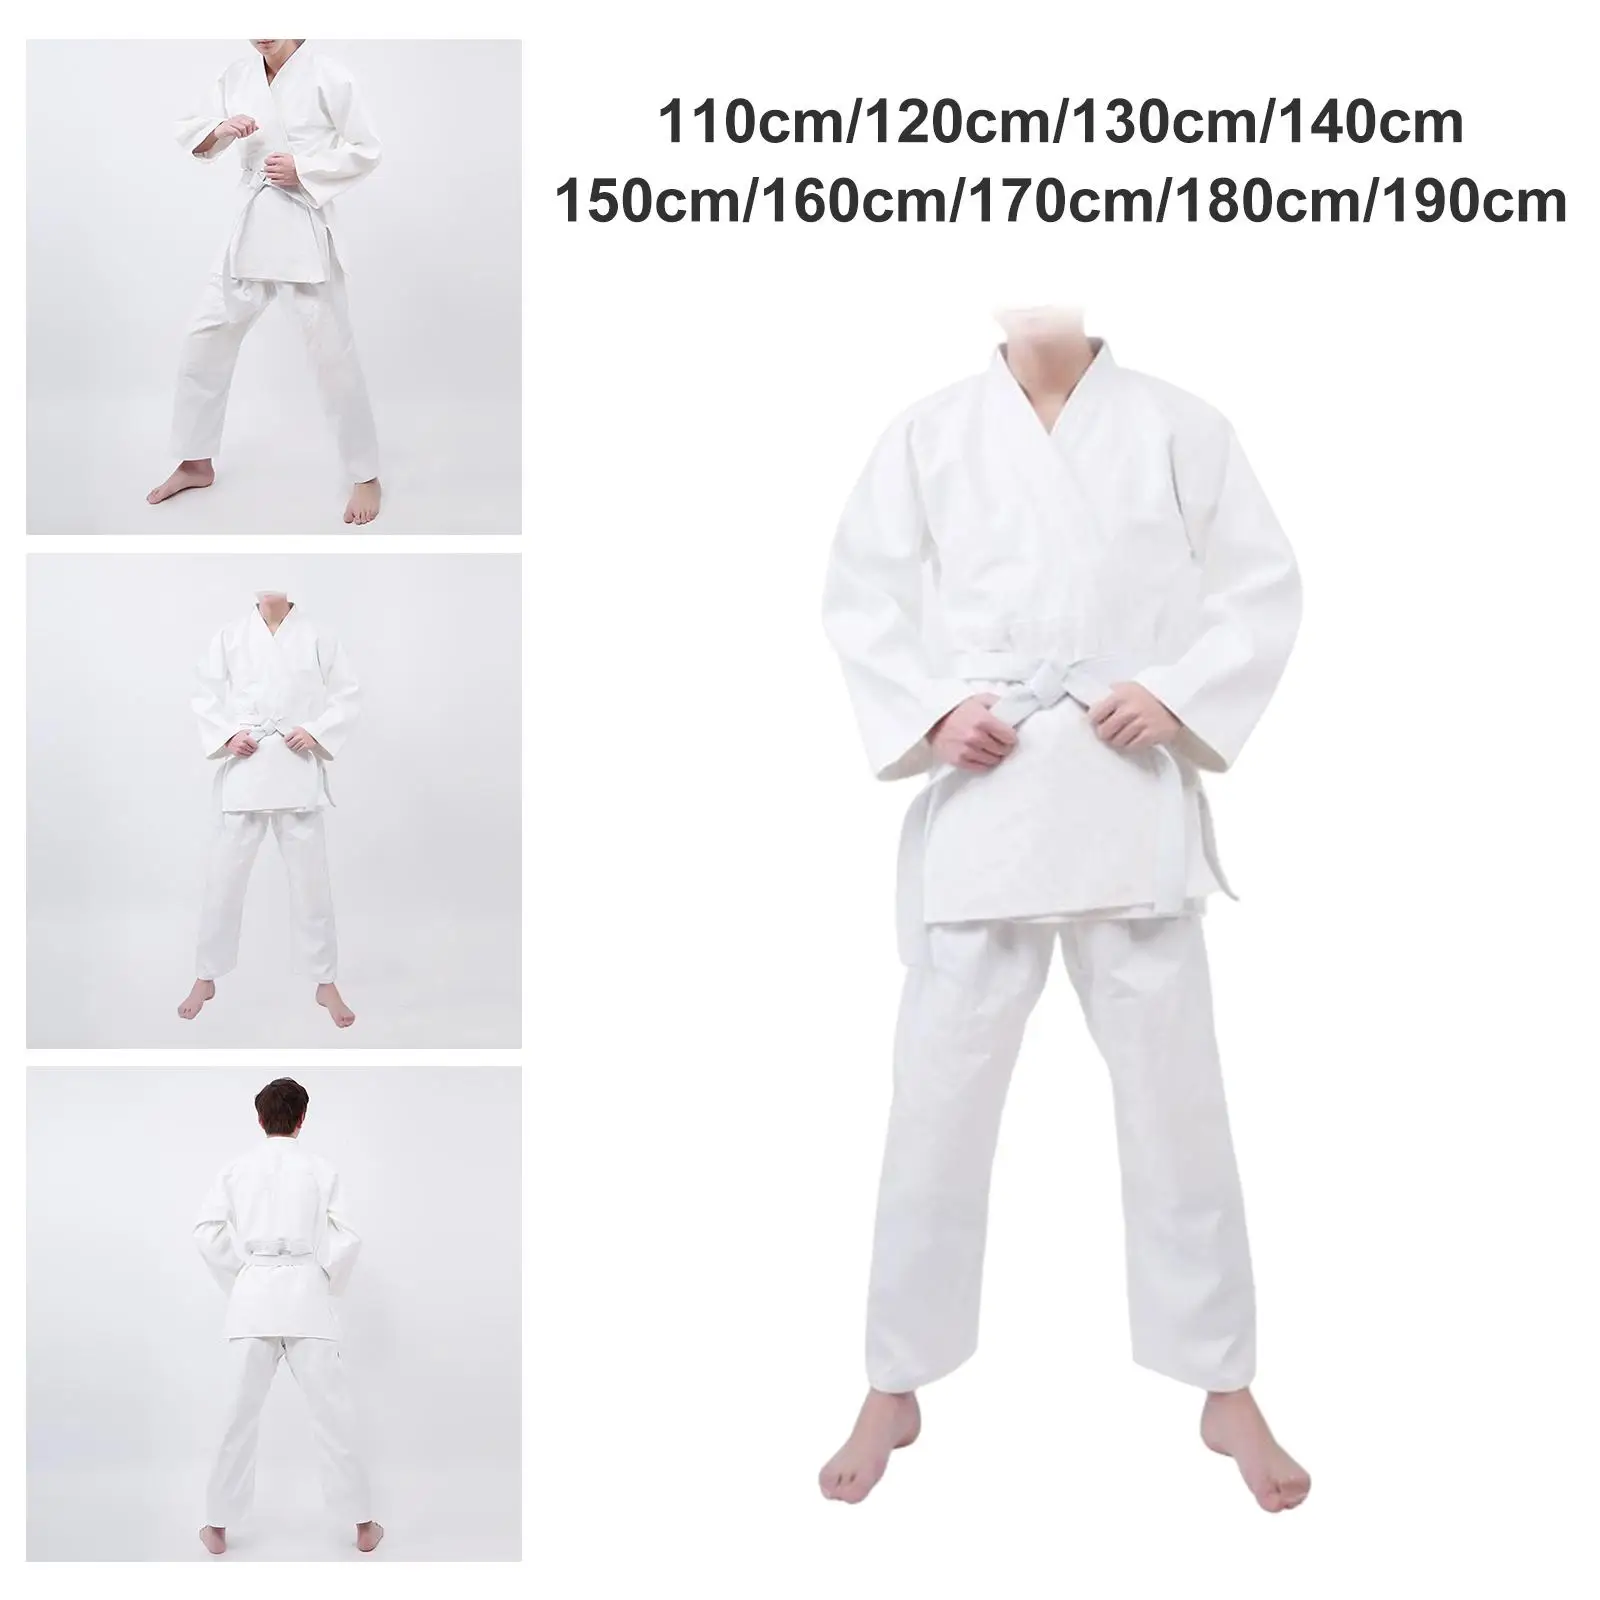 Unisex Judo Suit Costumes with Belt Stage Karate Sports Lightweight Clothes for Men Kids Adult Youth Fitness Training